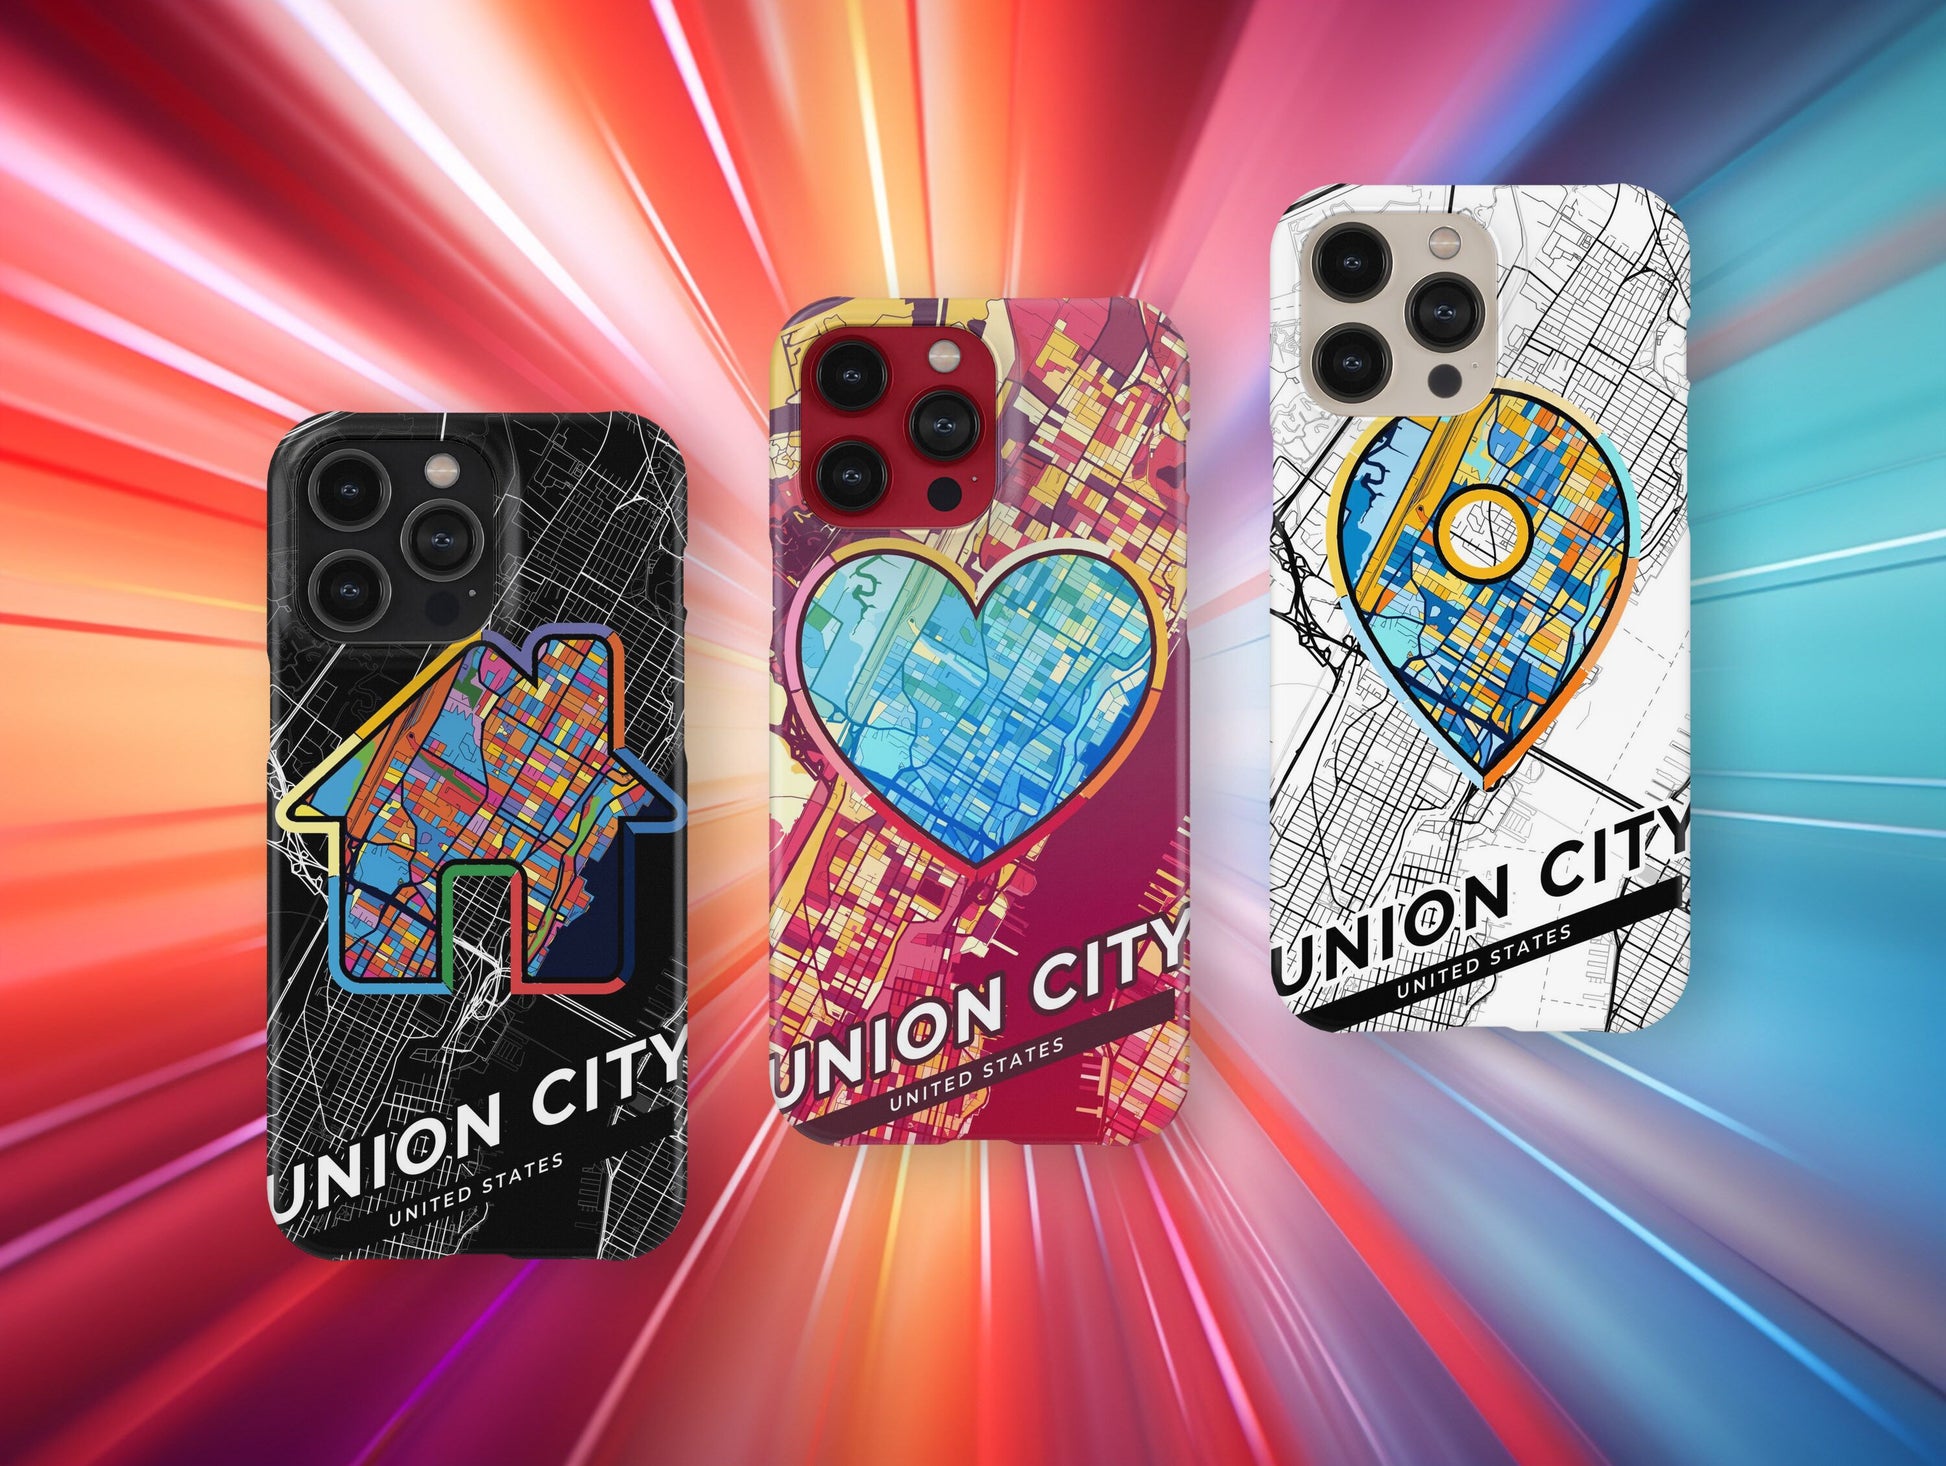 Union City New Jersey slim phone case with colorful icon